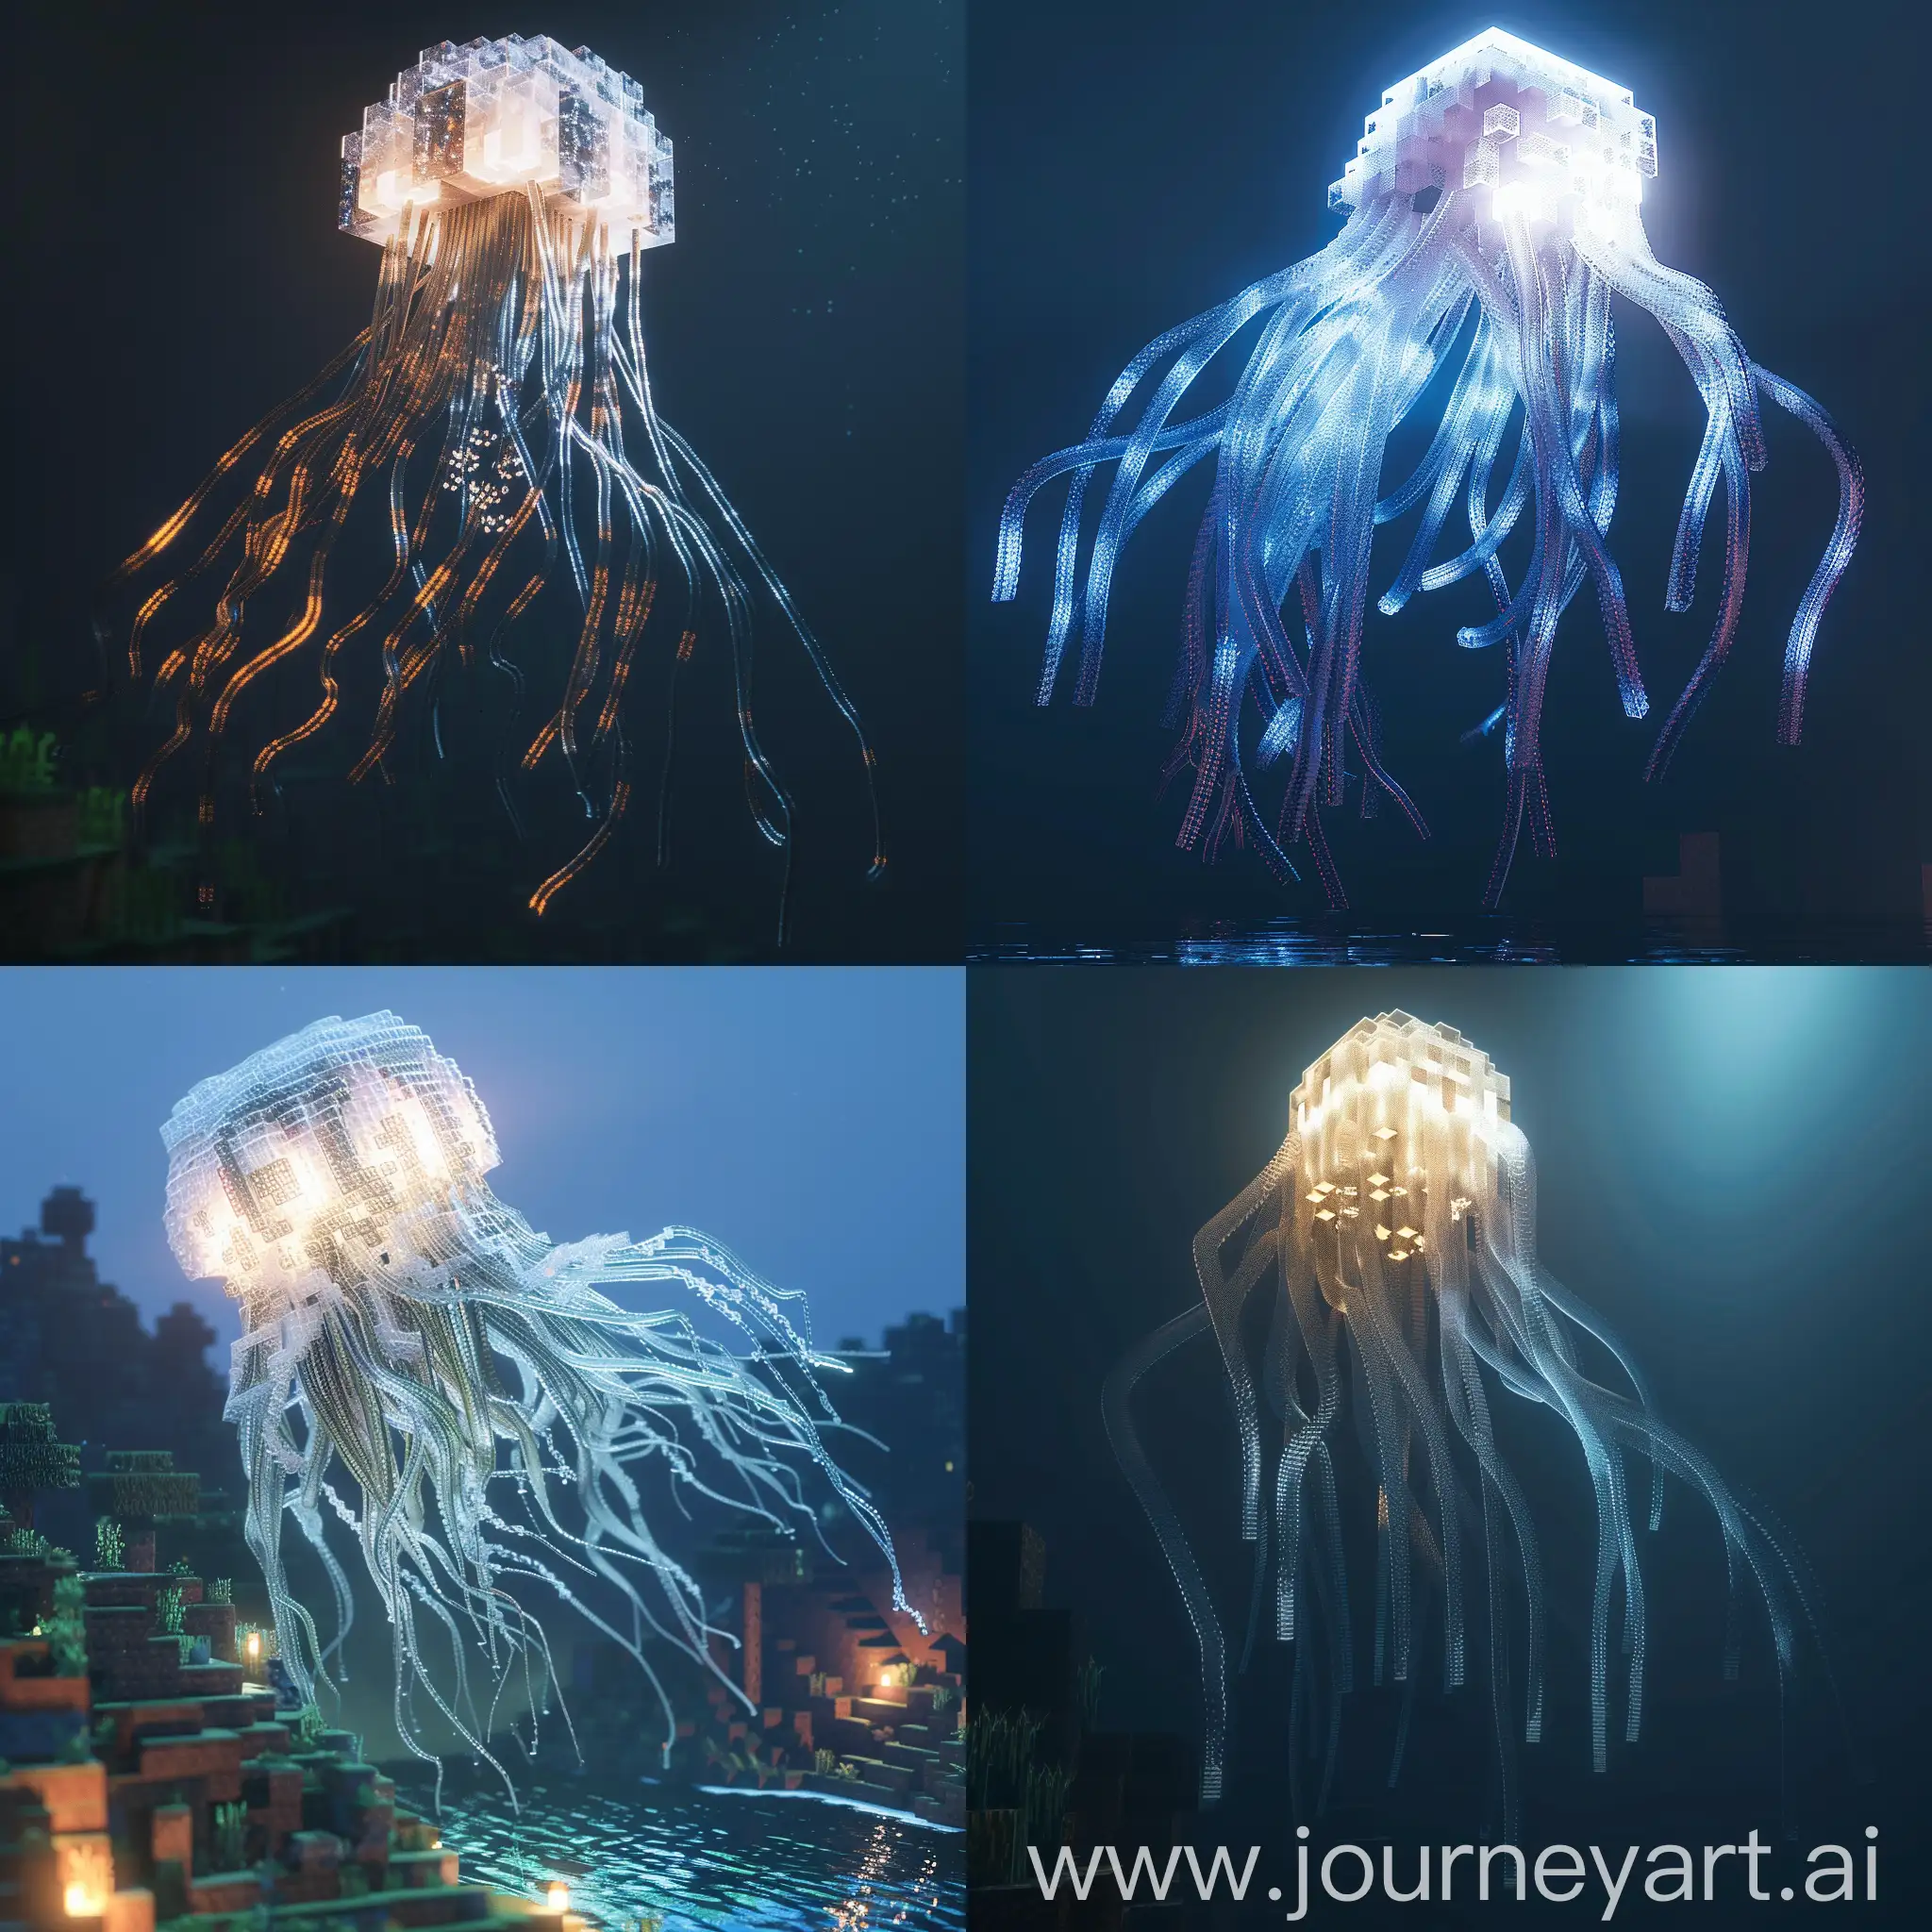 A photorealistic depiction of a Minecraft Ghast, a large, floating, jellyfish-like creature with long, translucent tentacles